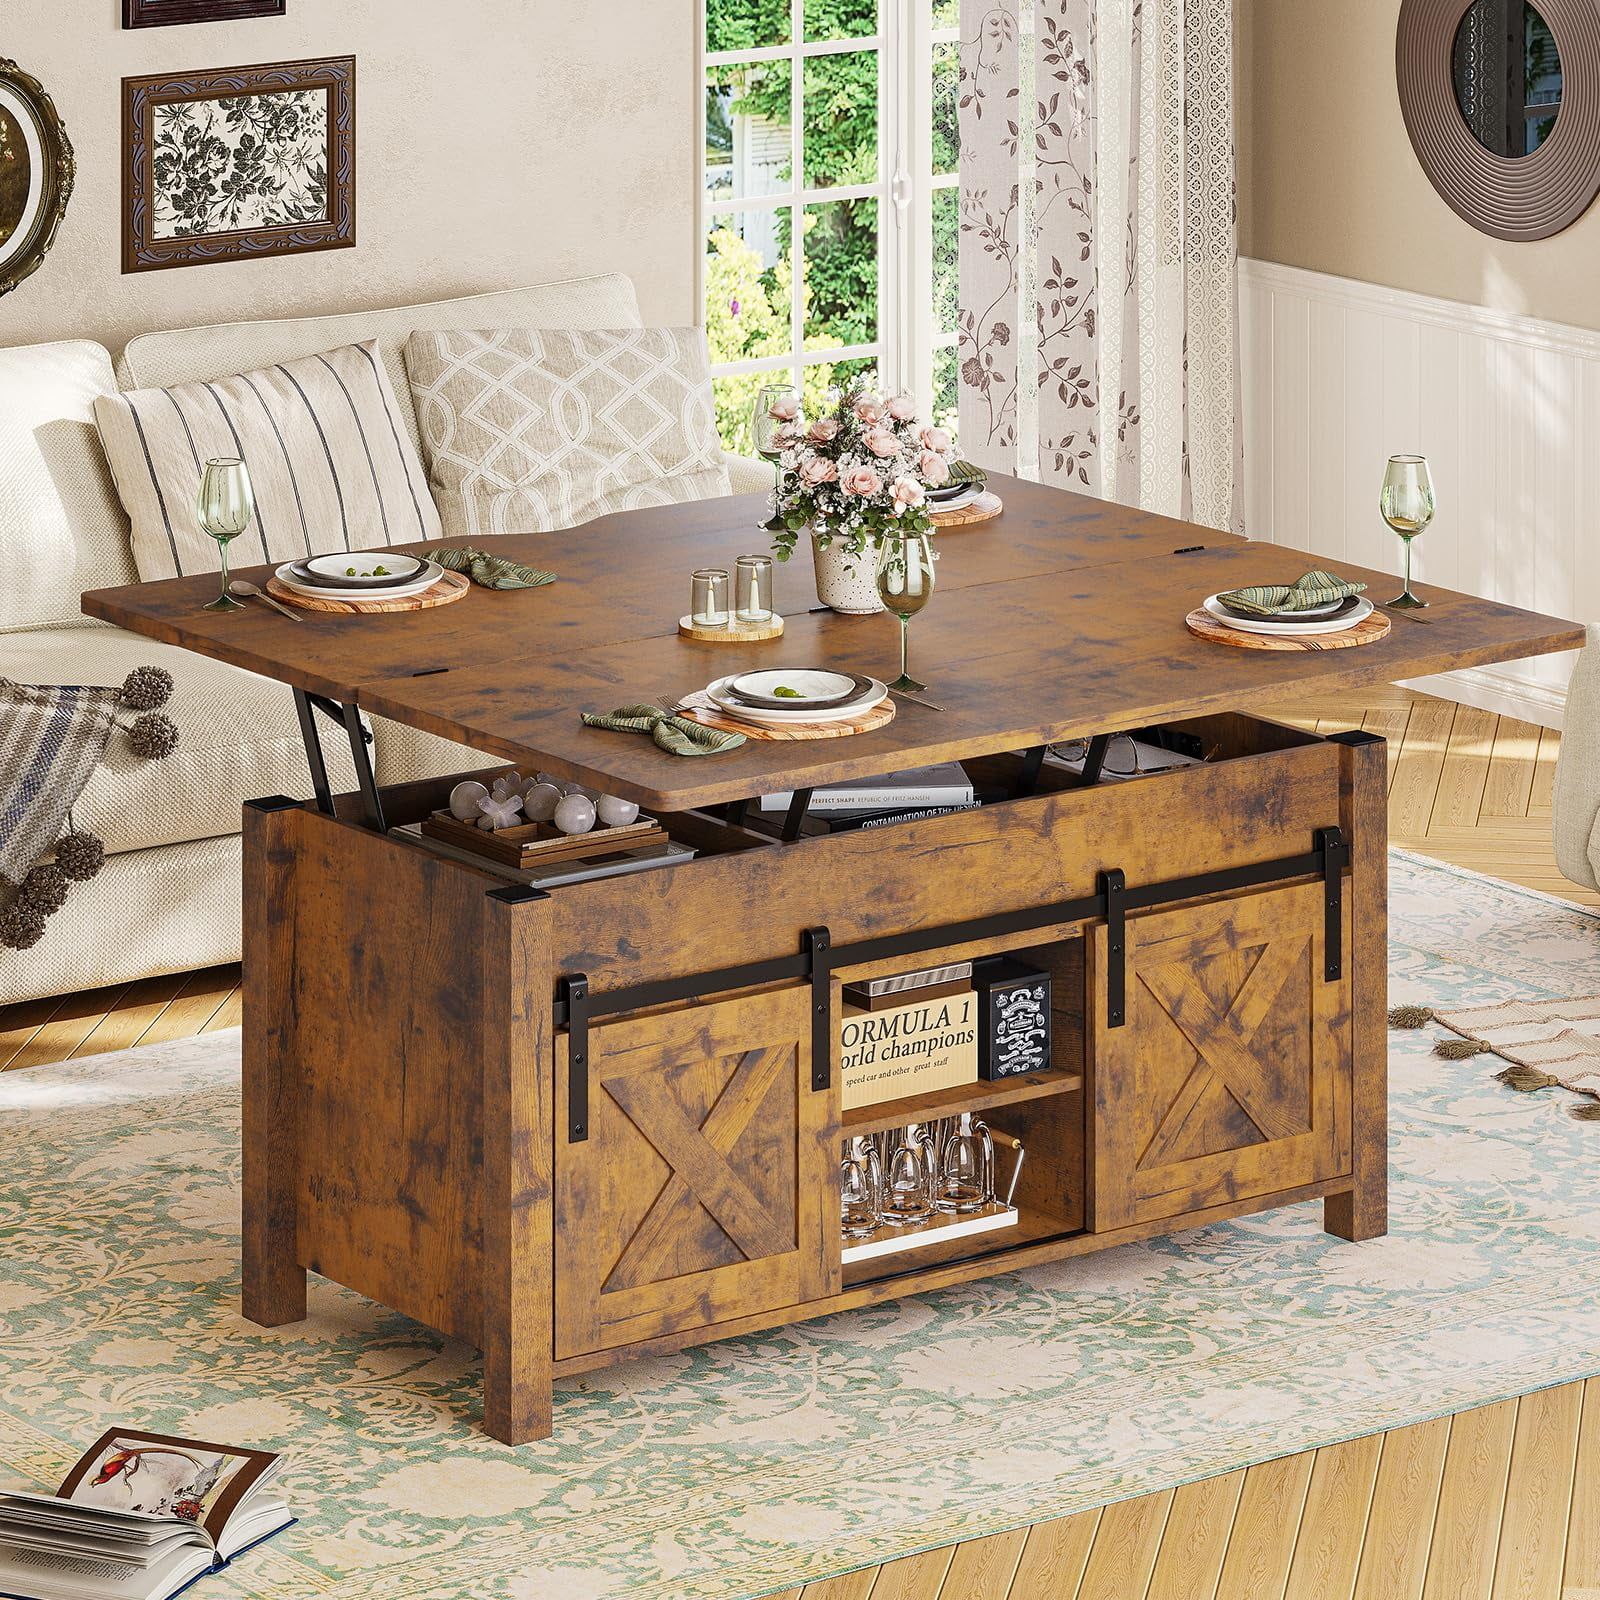 Coffee Table For Living Room, Farmhouse Lift Top Coffee Tables With Storage  And Hidden Compartment, Rising Tabletop Center Table For Living Room  Reception Room, Rustic Brown – Walmart Inside Lift Top Coffee Tables (View 15 of 15)